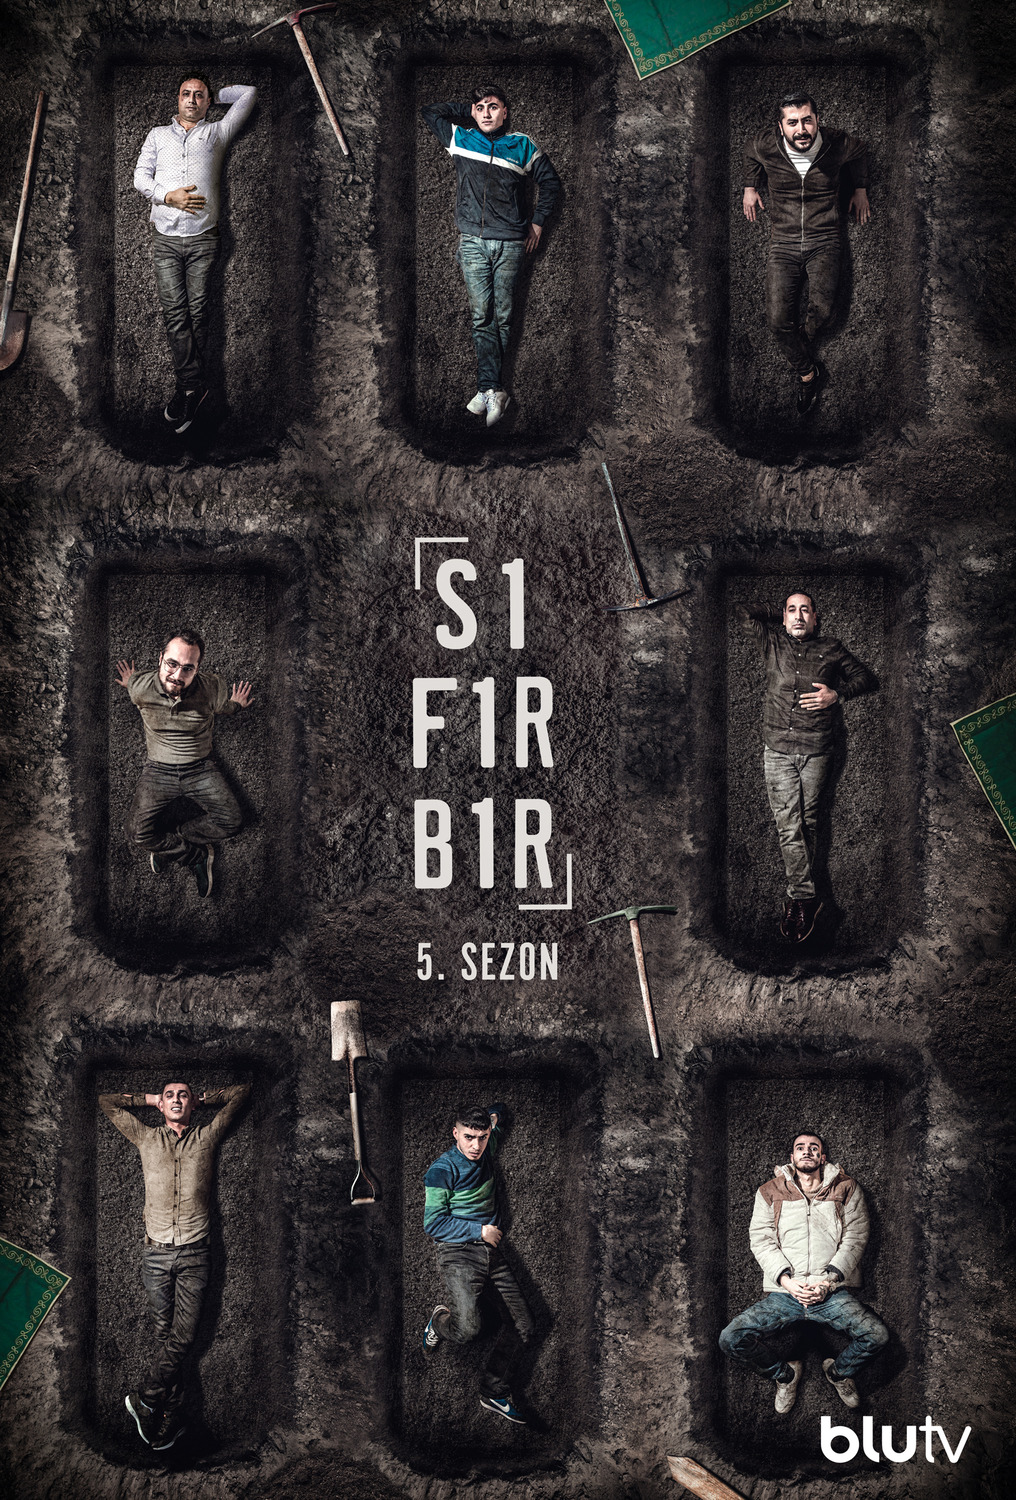 Extra Large TV Poster Image for Sifir Bir (#20 of 23)